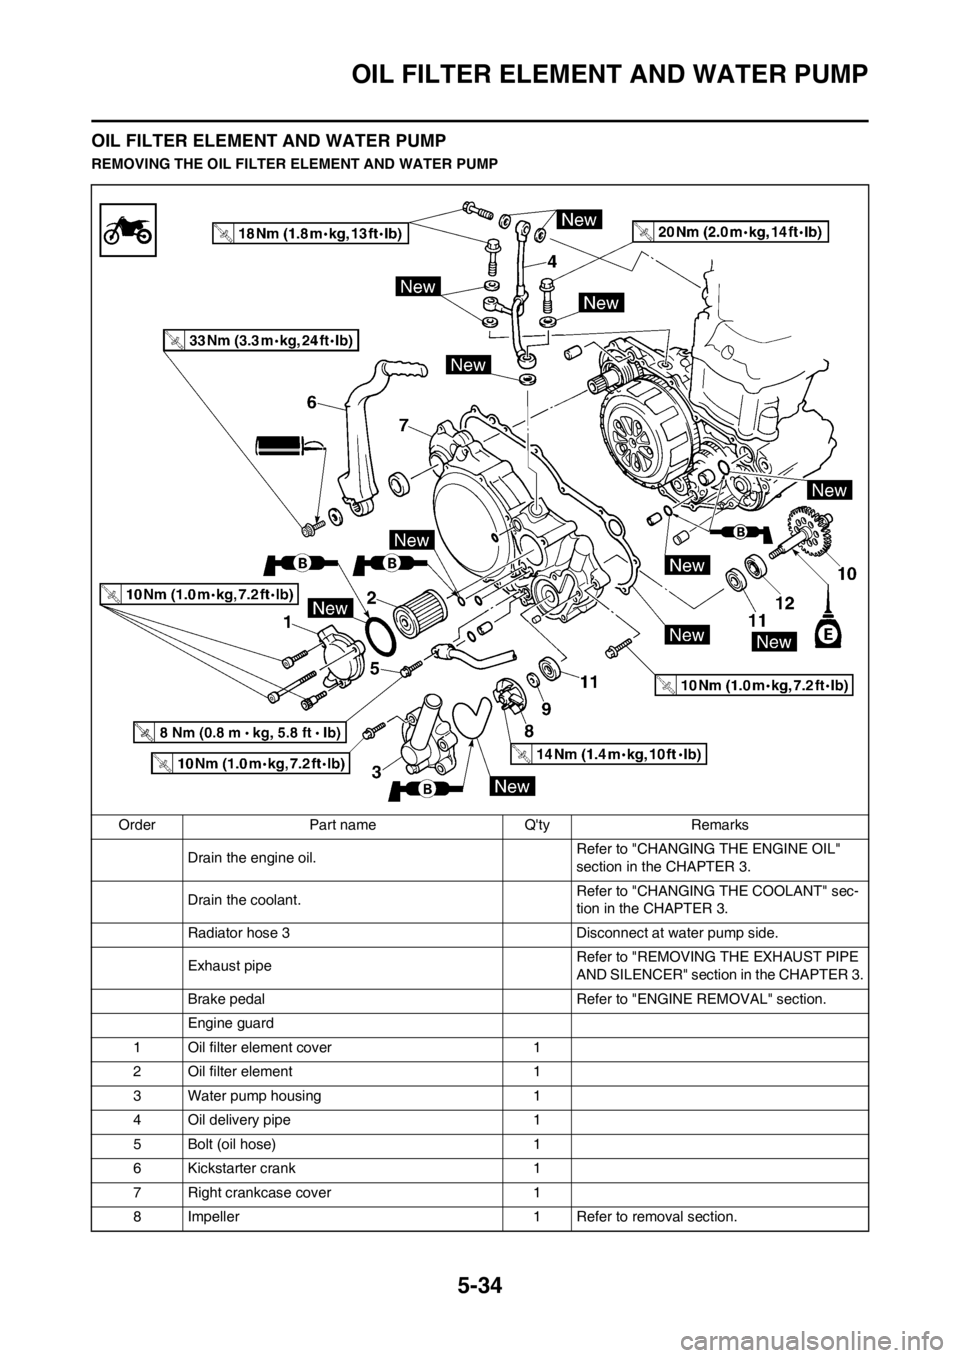 YAMAHA WR 250F 2013 Owners Guide 5-34
OIL FILTER ELEMENT AND WATER PUMP
OIL FILTER ELEMENT AND WATER PUMP
REMOVING THE OIL FILTER ELEMENT AND WATER PUMP
Order Part name Qty Remarks
Drain the engine oil. Refer to "CHANGING THE ENGINE